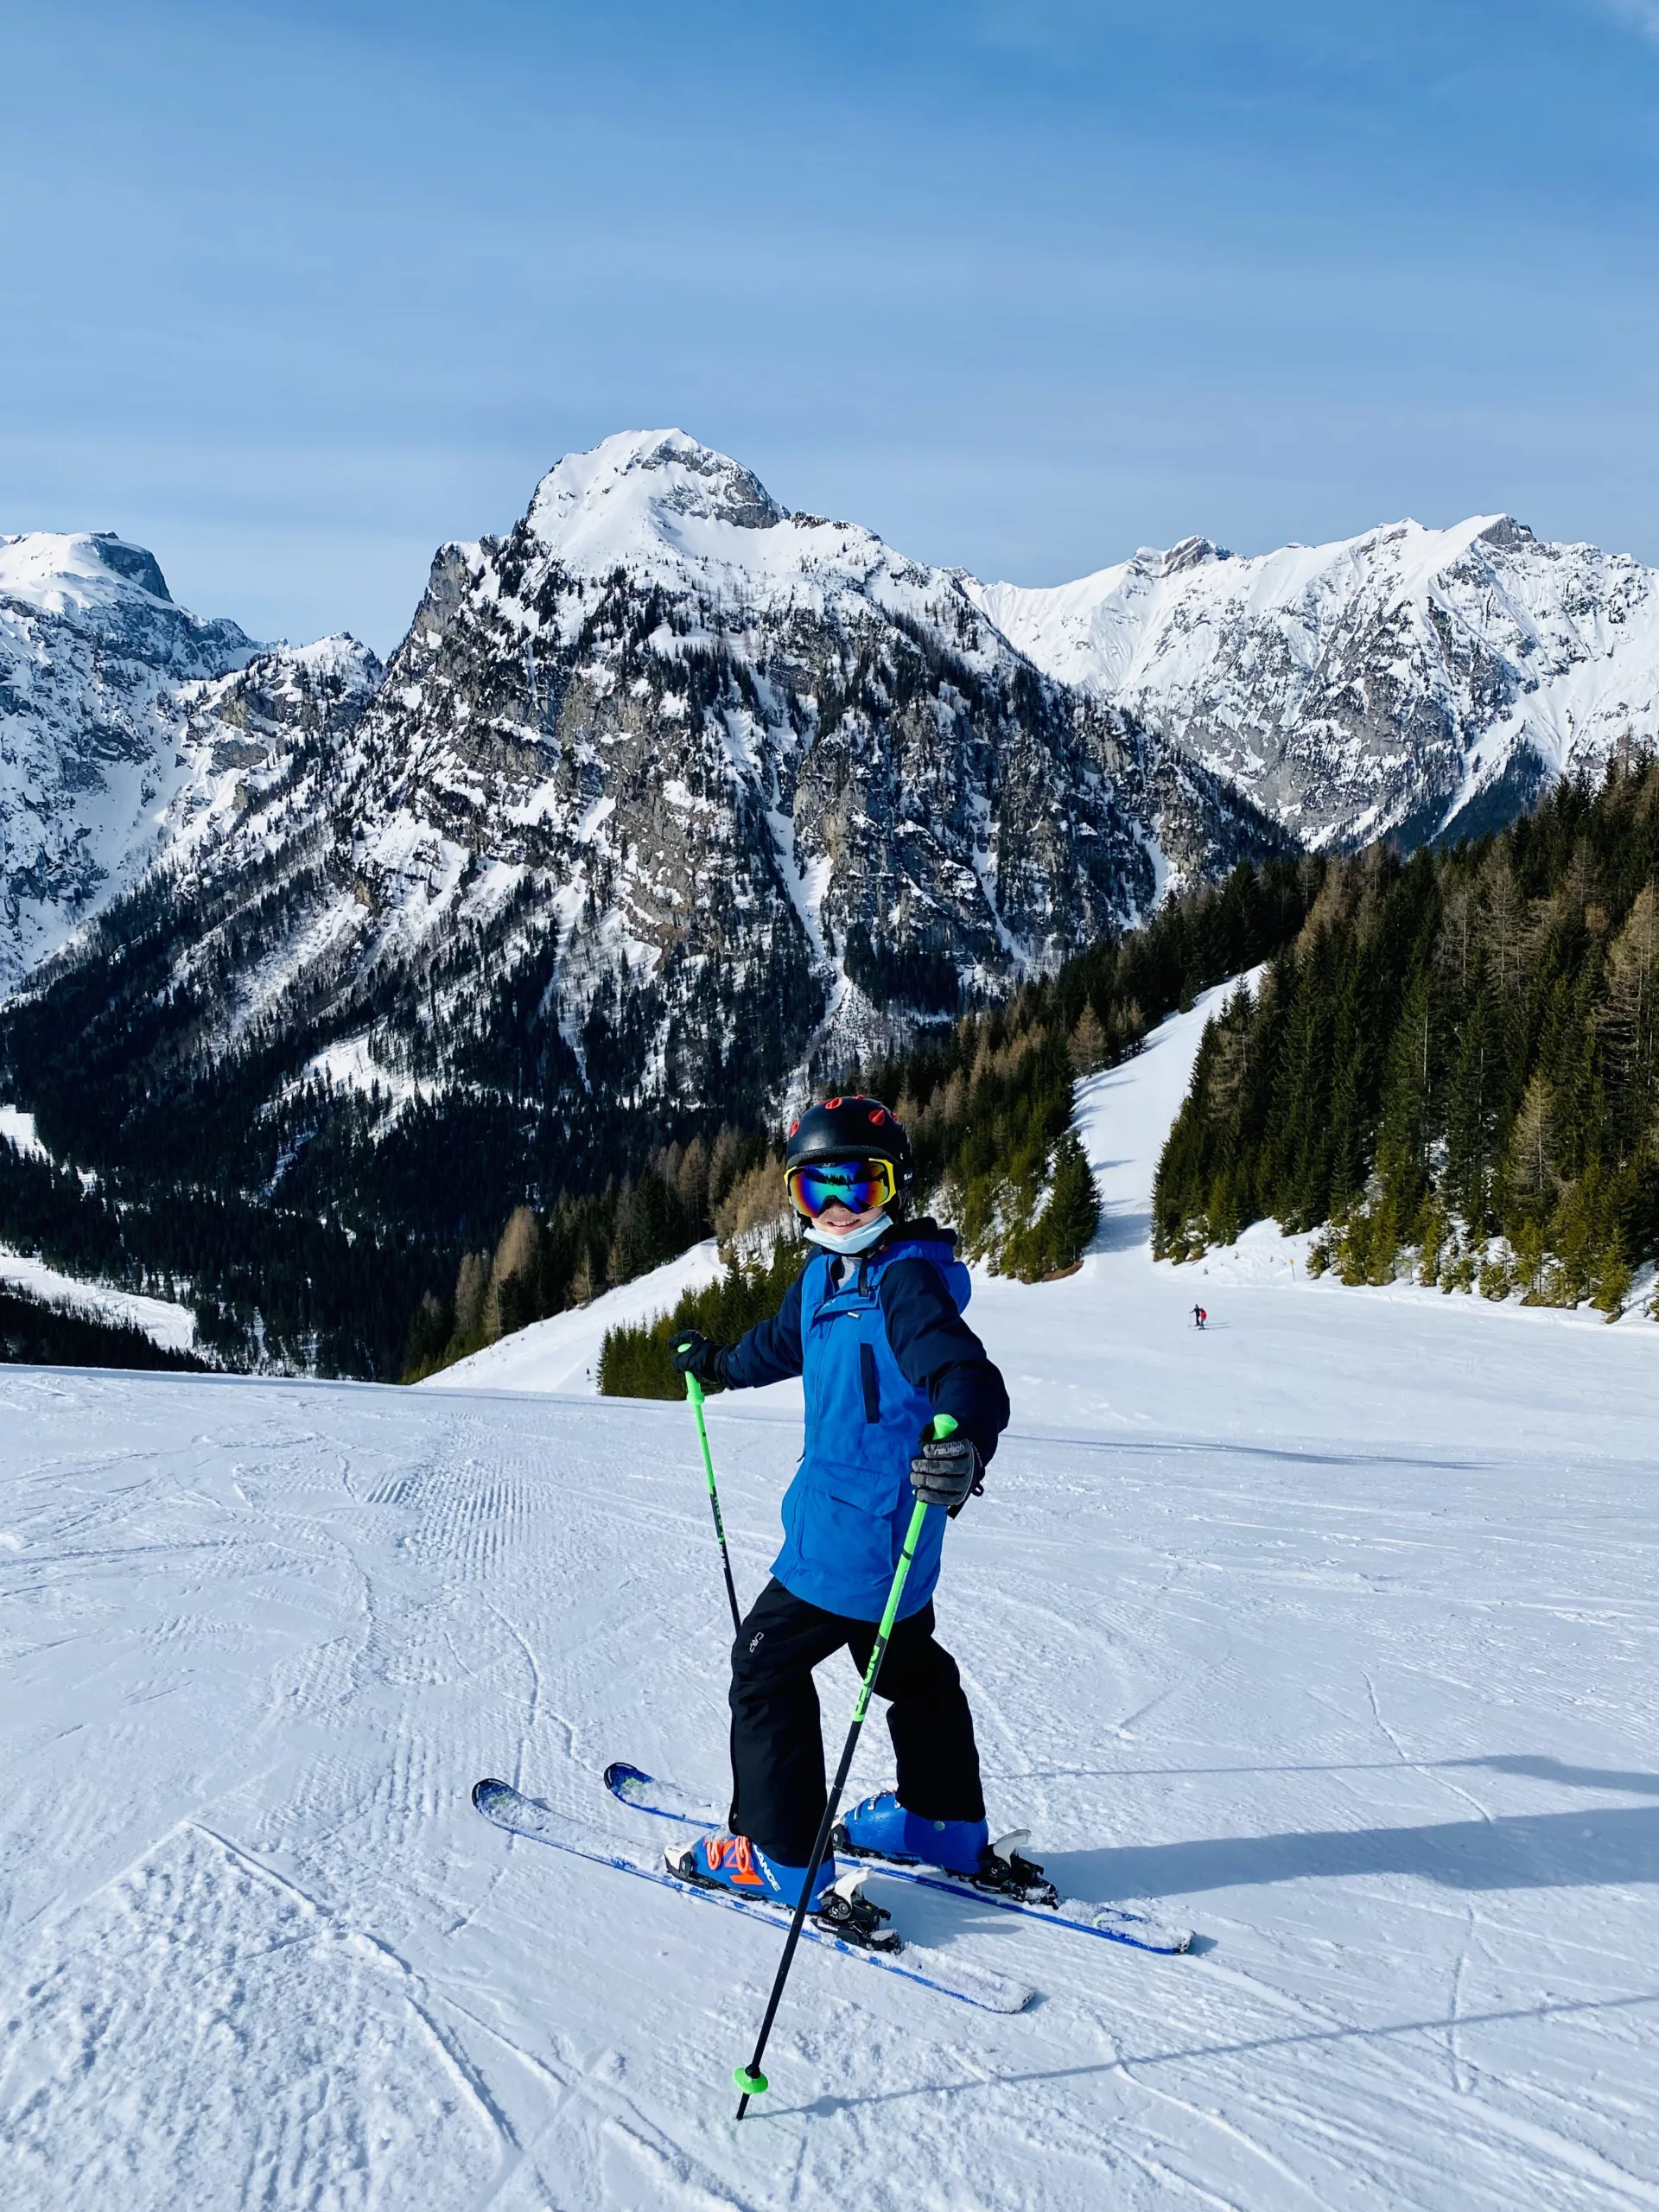 Skiing in Austria can be Underrated - Here's Why It's Worth Checking Out - especially for families on a budget